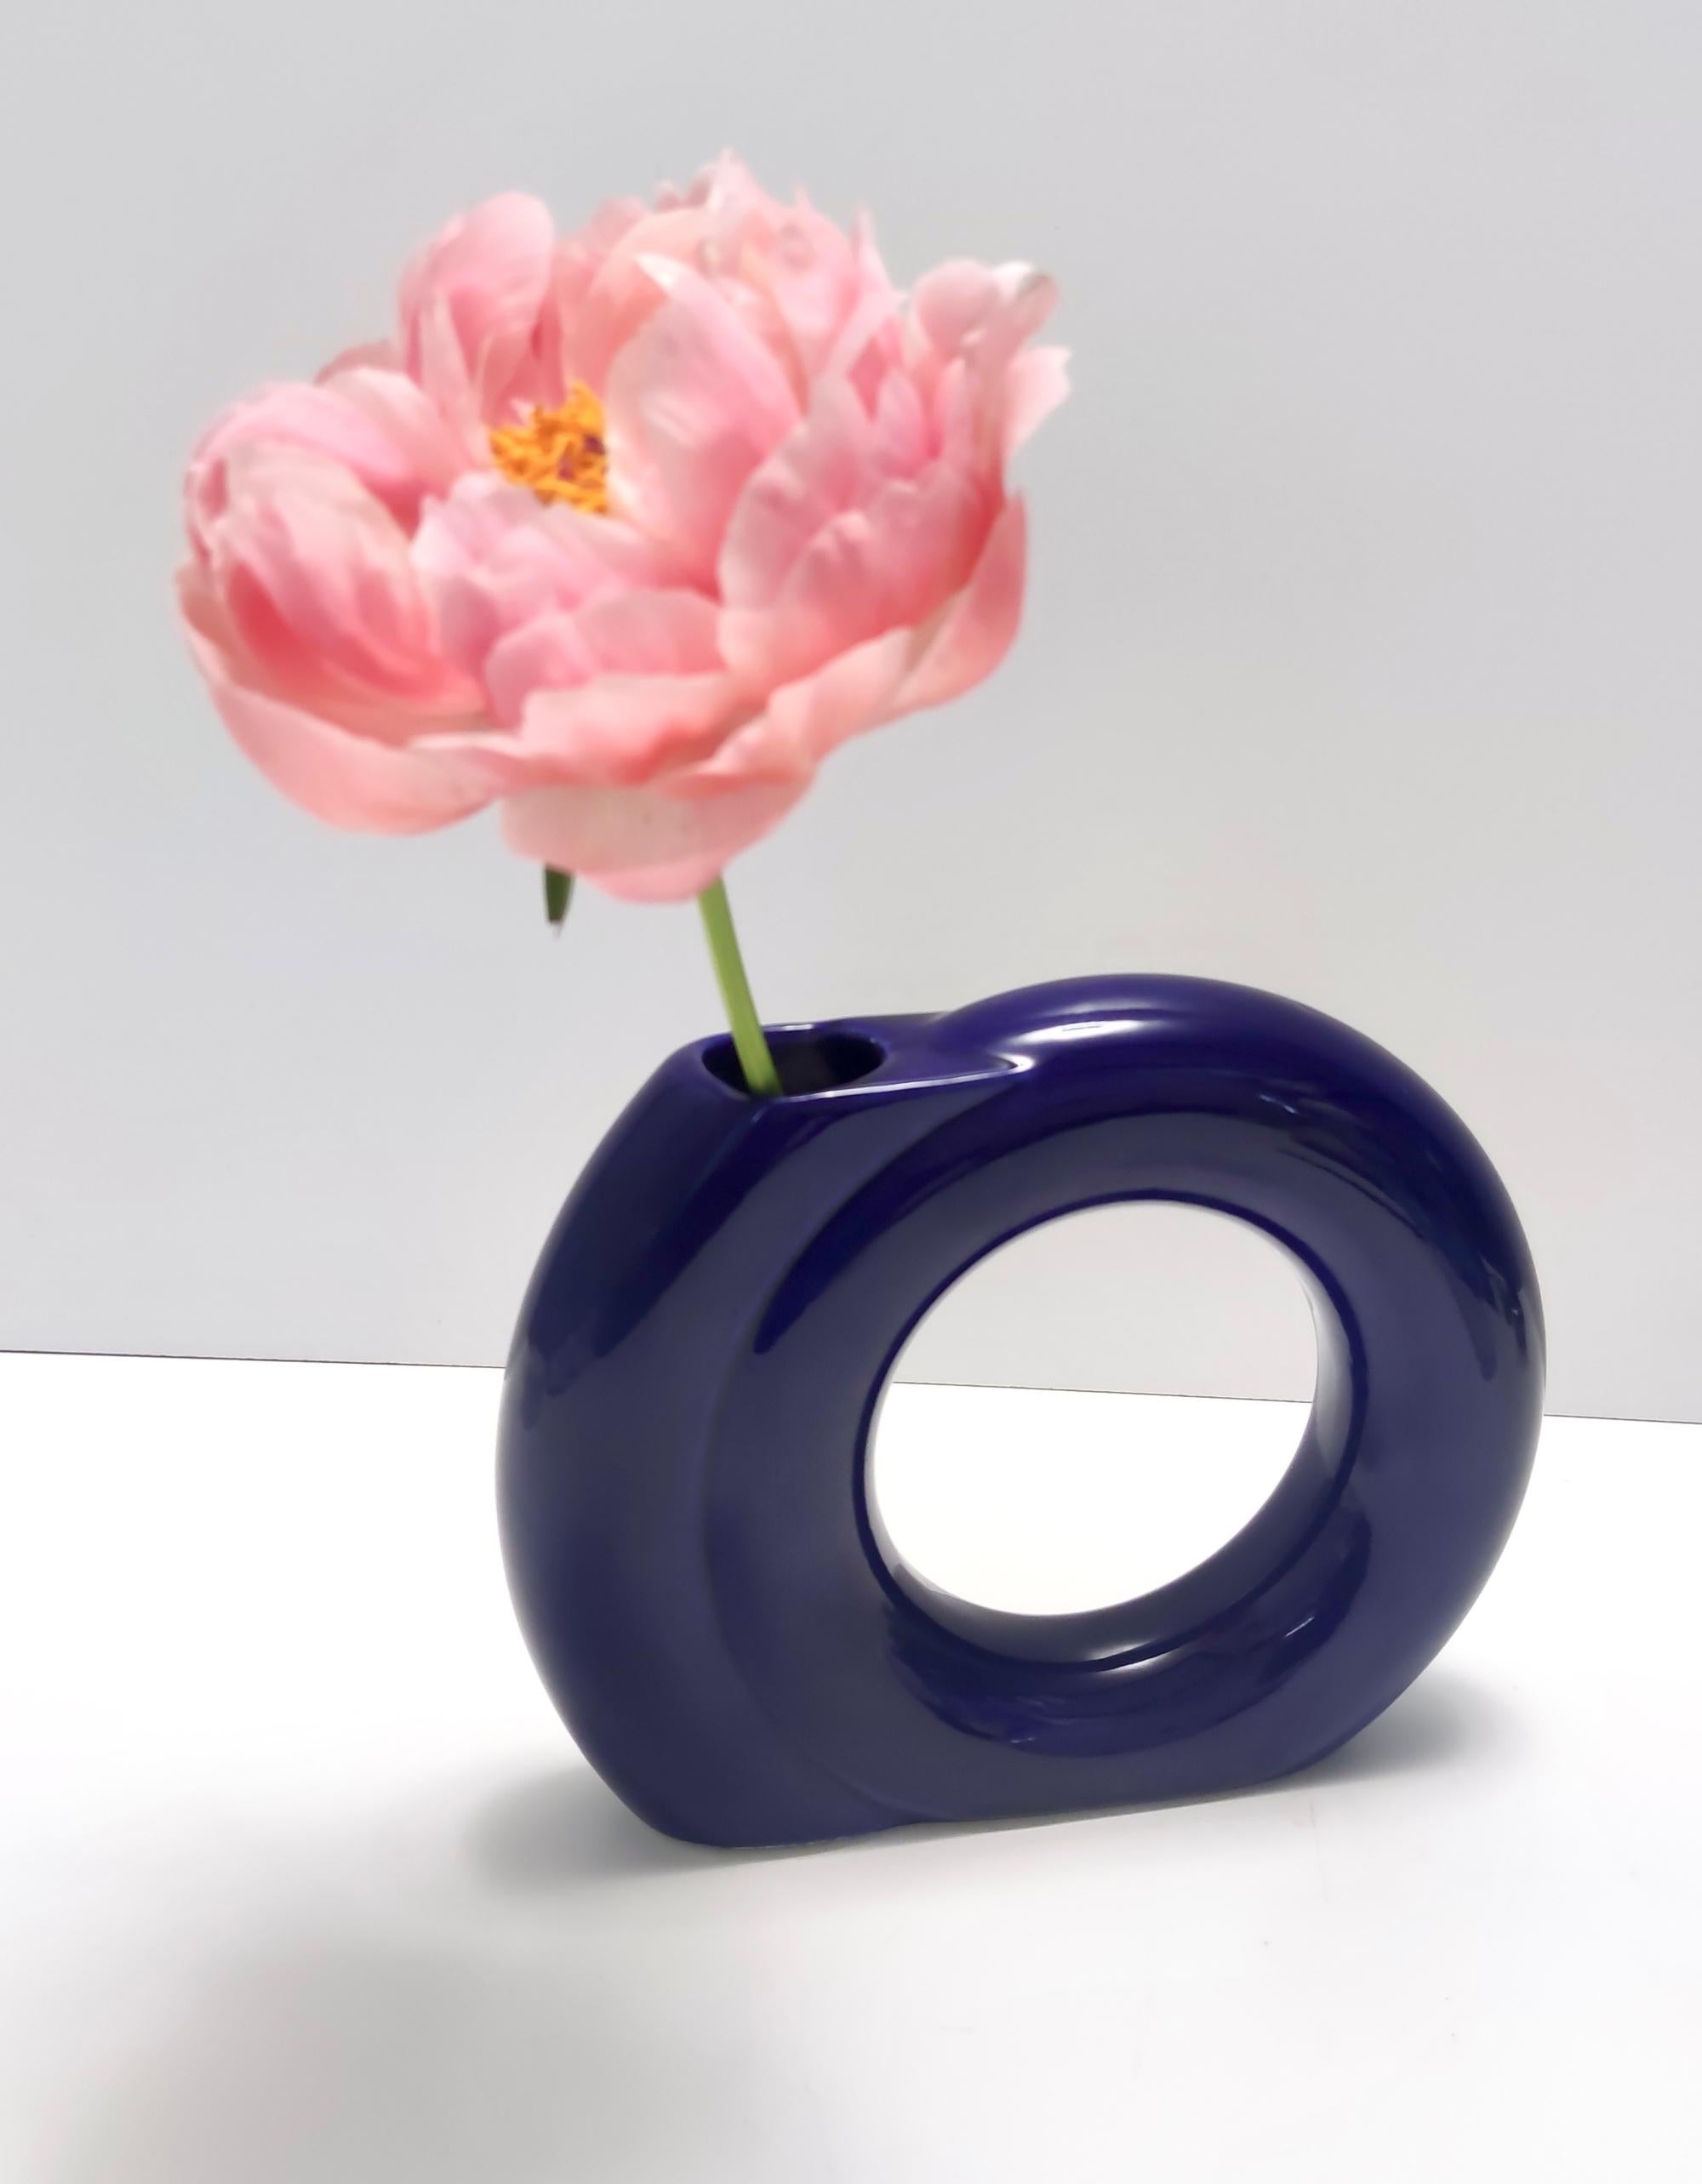 Made in Italy, 1970s.
It is made in blue glazed ceramic by Pietro Arosio for Parravicini.
This is a vintage piece, therefore it might show slight traces of use, but it can be considered as in excellent original condition. 

Measures:
Width: 23